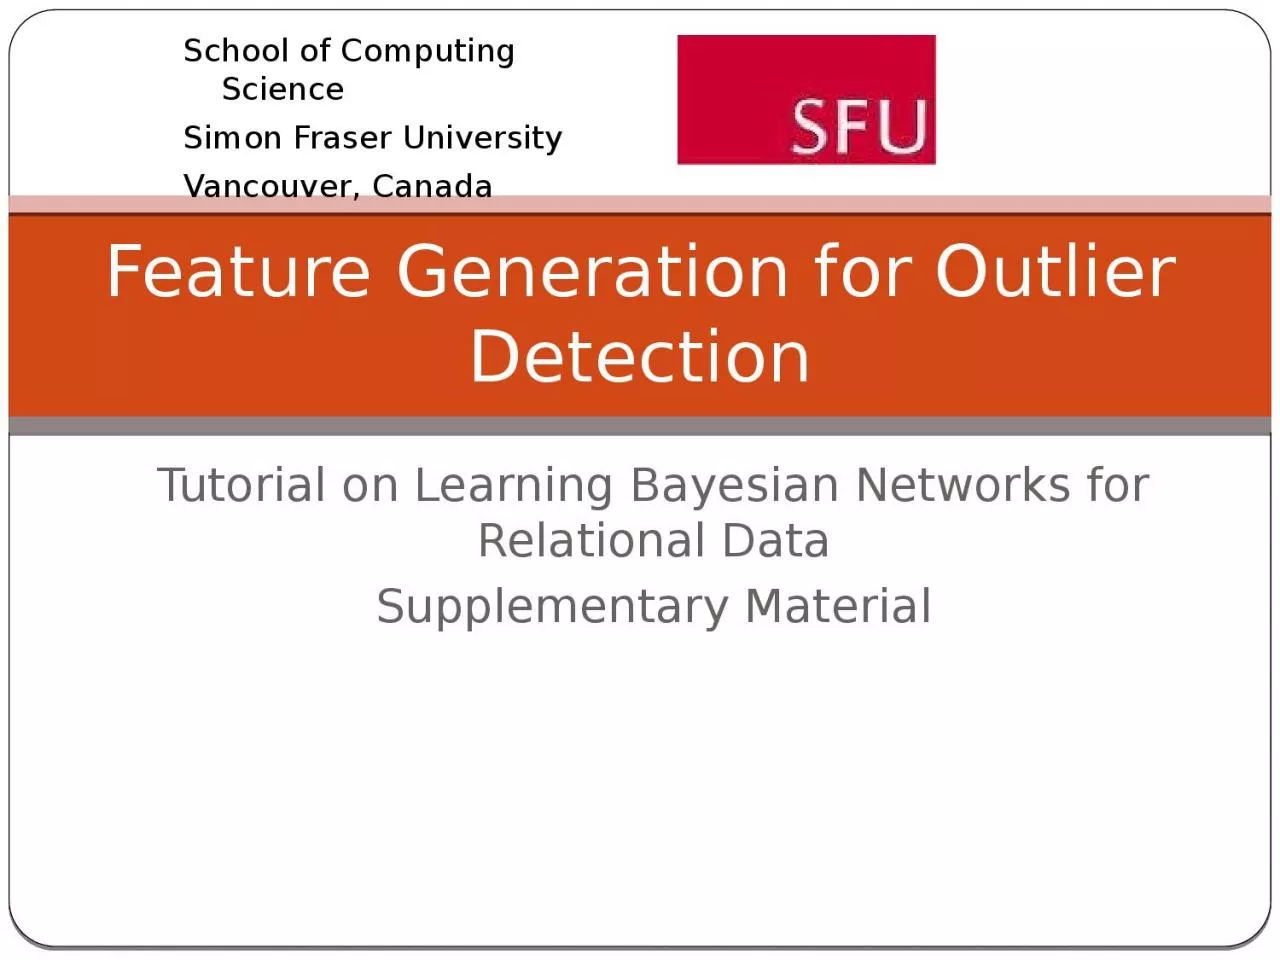 Tutorial on Learning Bayesian Networks for Relational Data